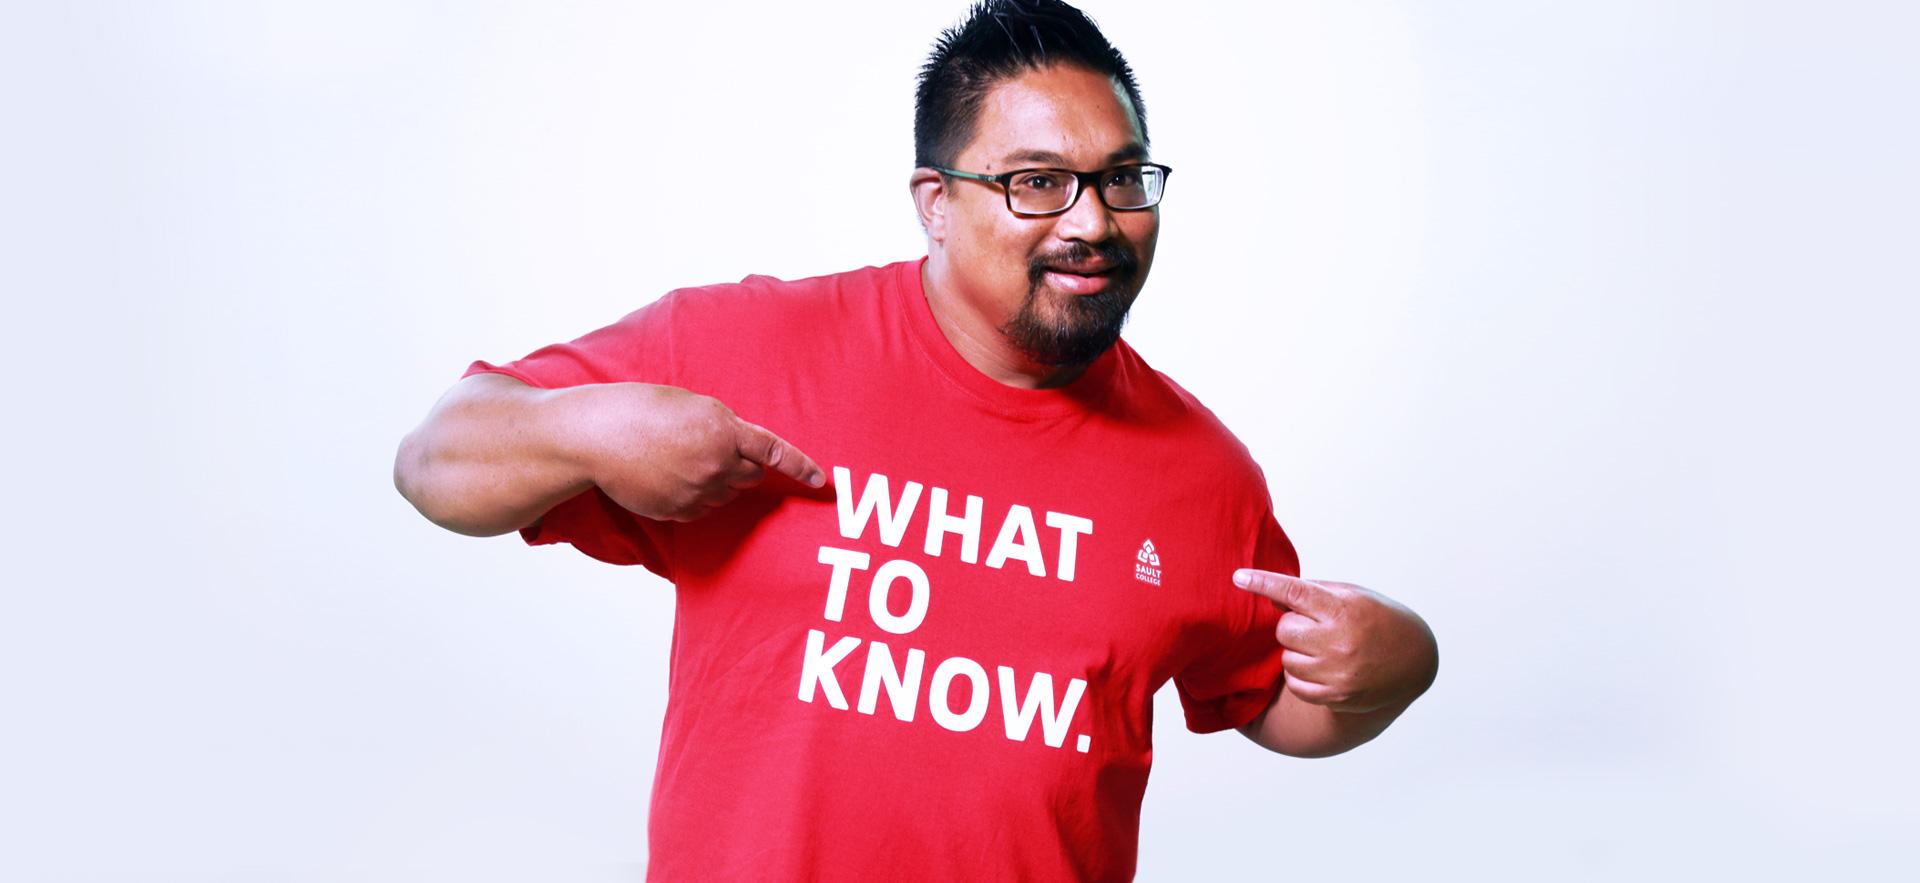 Recruiter pointing to t-shirt saying "What to know"